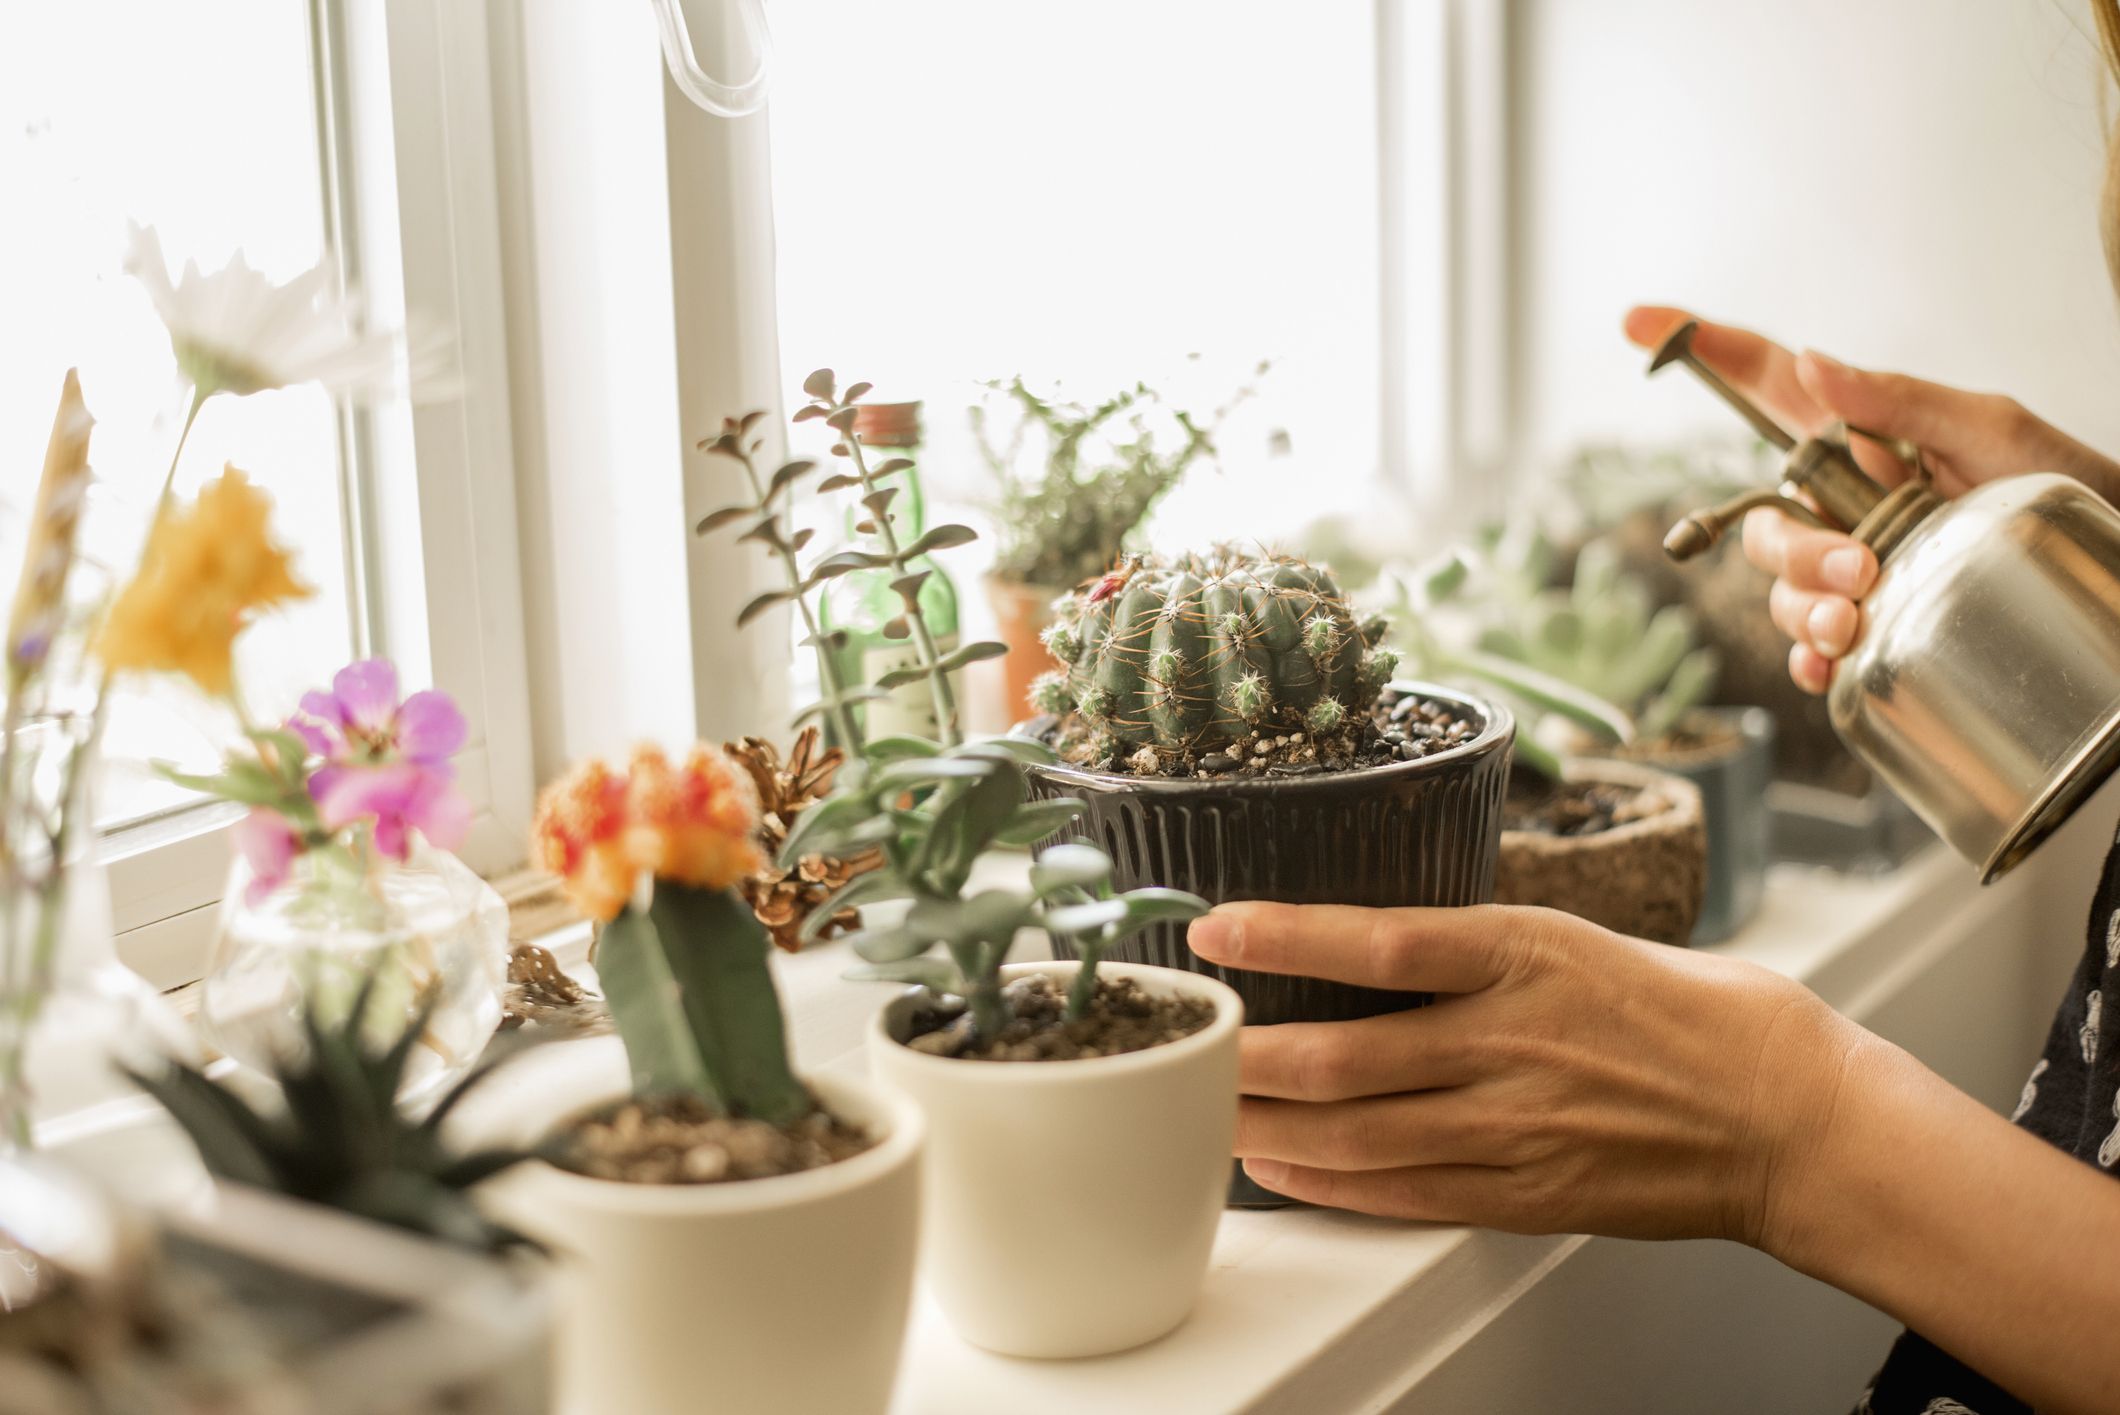 Does Placing Cactus in Your Home Have Any Benefits?